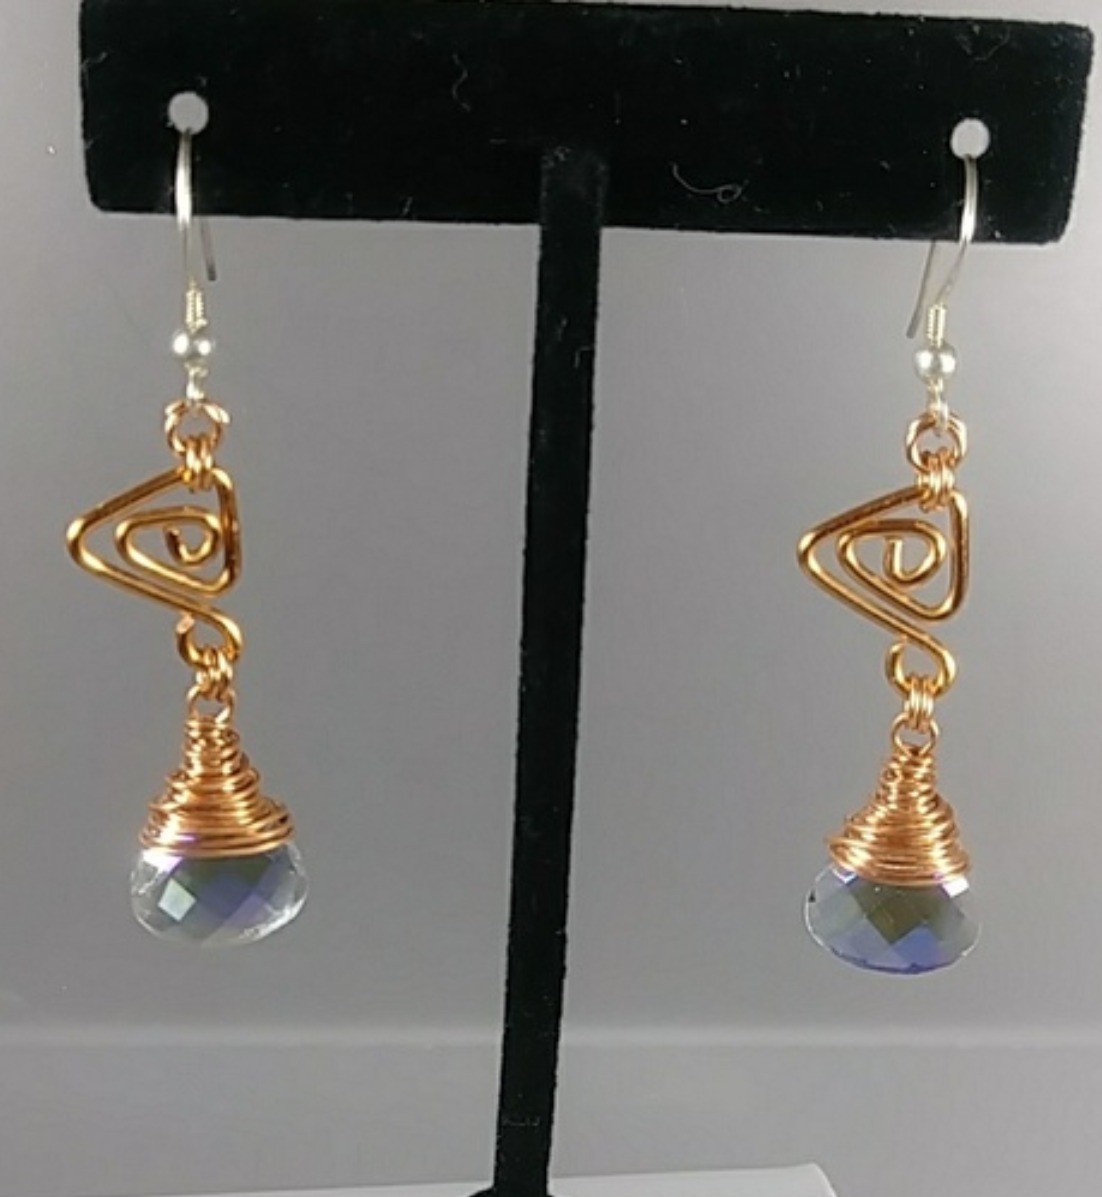 612 - EAR - Description:  Earrings: Copper Wire, Faceted Glass Beads, Sterling Silver Earwire   Dimension: 2 ' L (Inches)